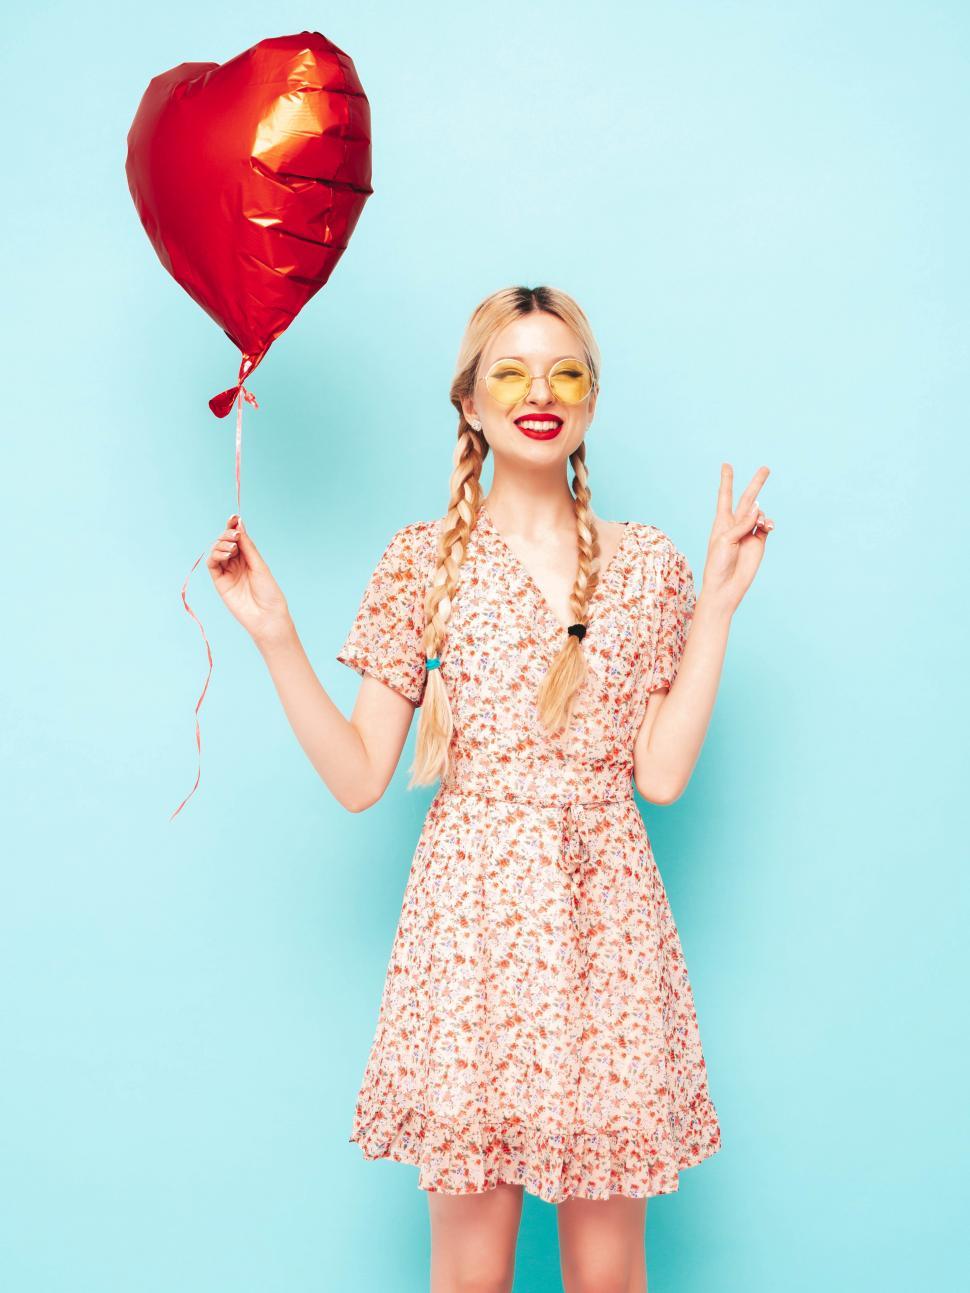 Free Image of A woman holding a heart shaped balloon 